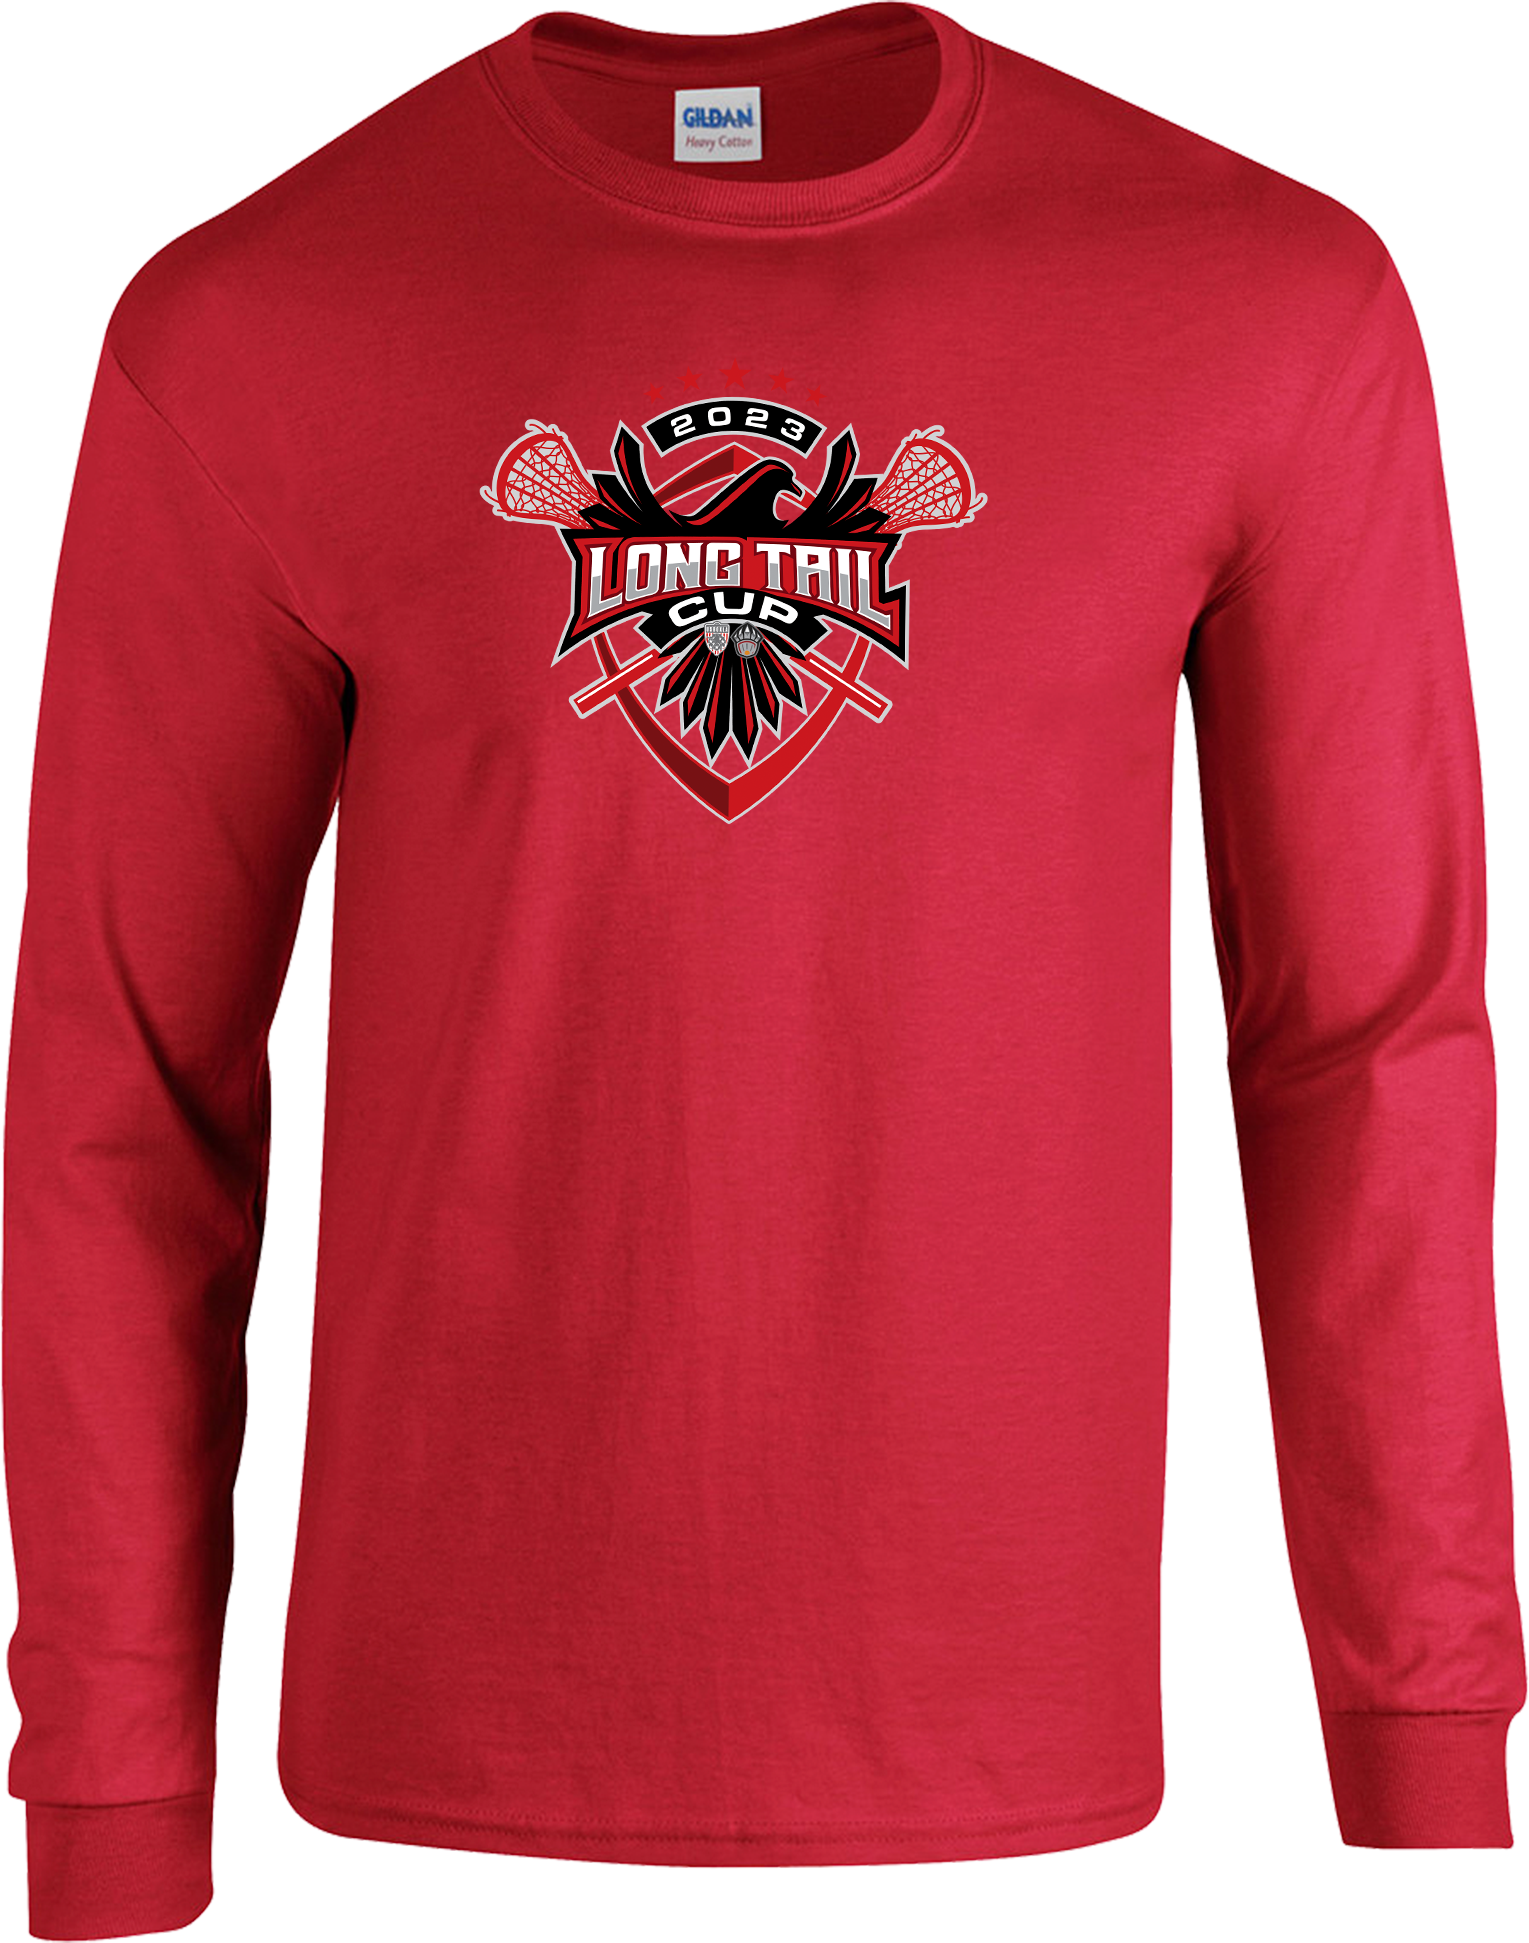 LONG SLEEVES - 2023 Long Tail Cup